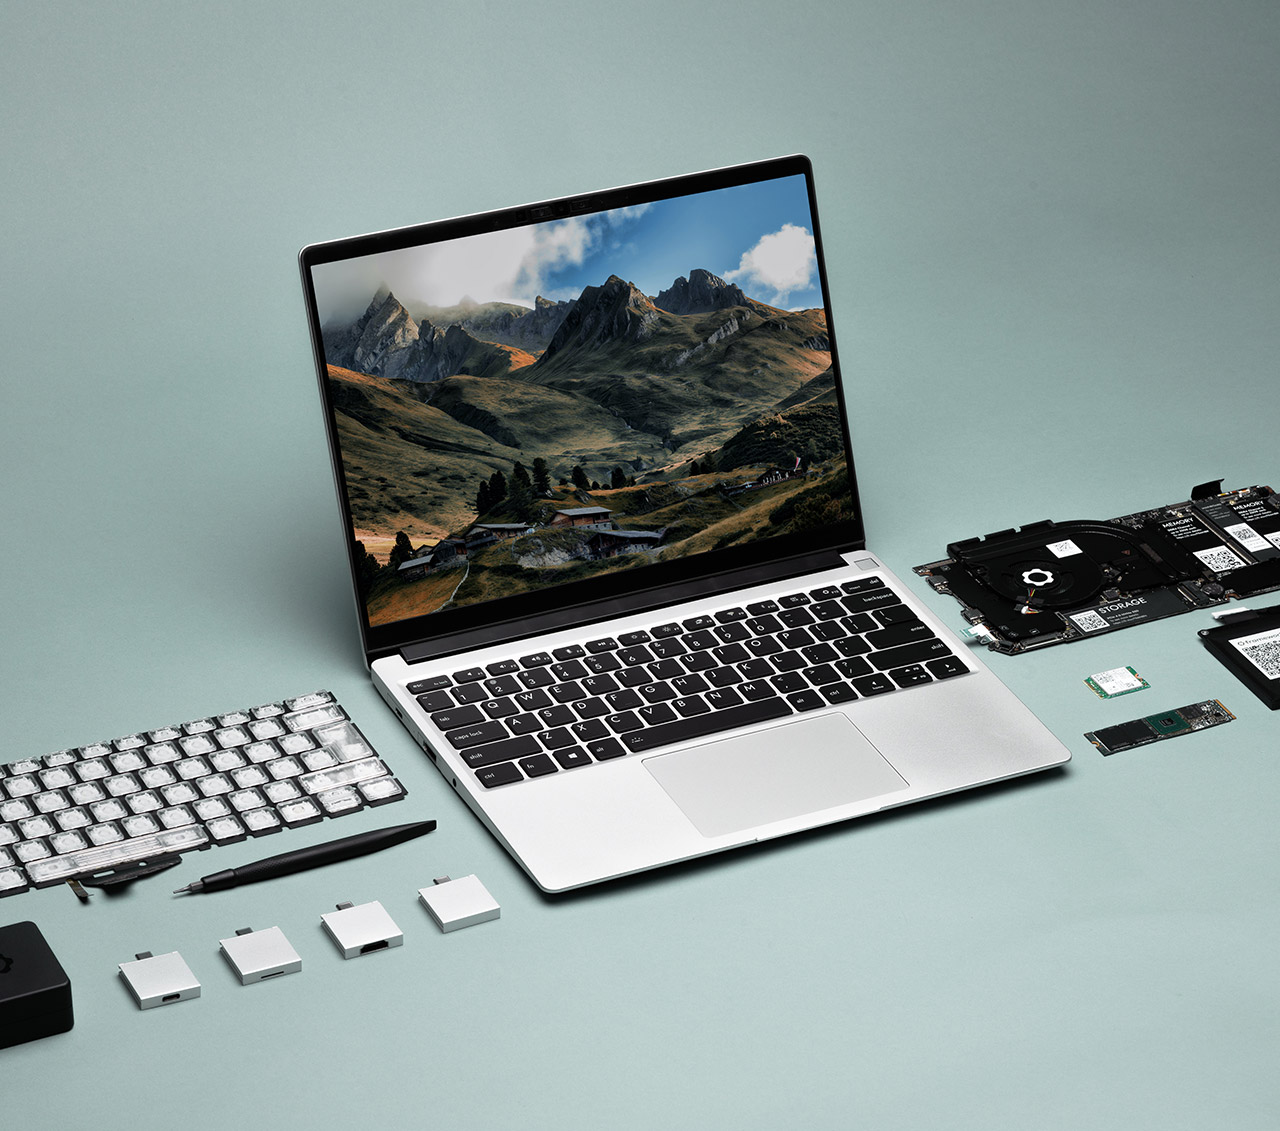 Modular Framework Laptop is Completely Customizable, Lets You Easily